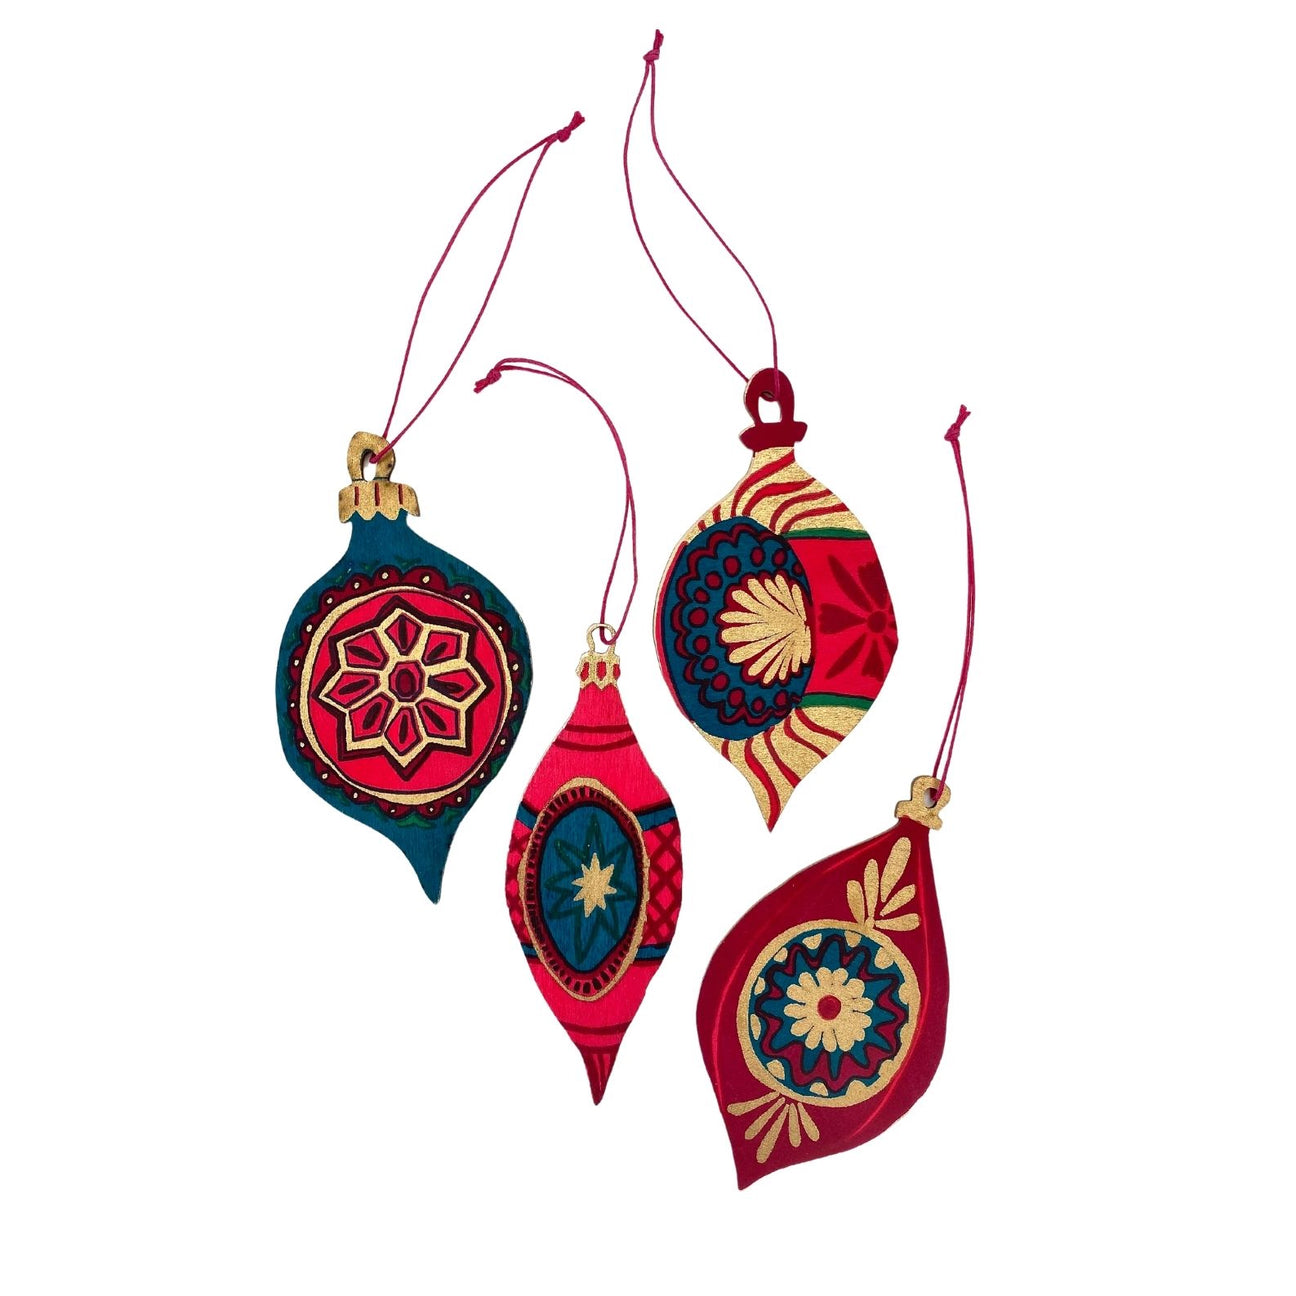 Handprinted Winter Holiday Wooden Decorations - various designs